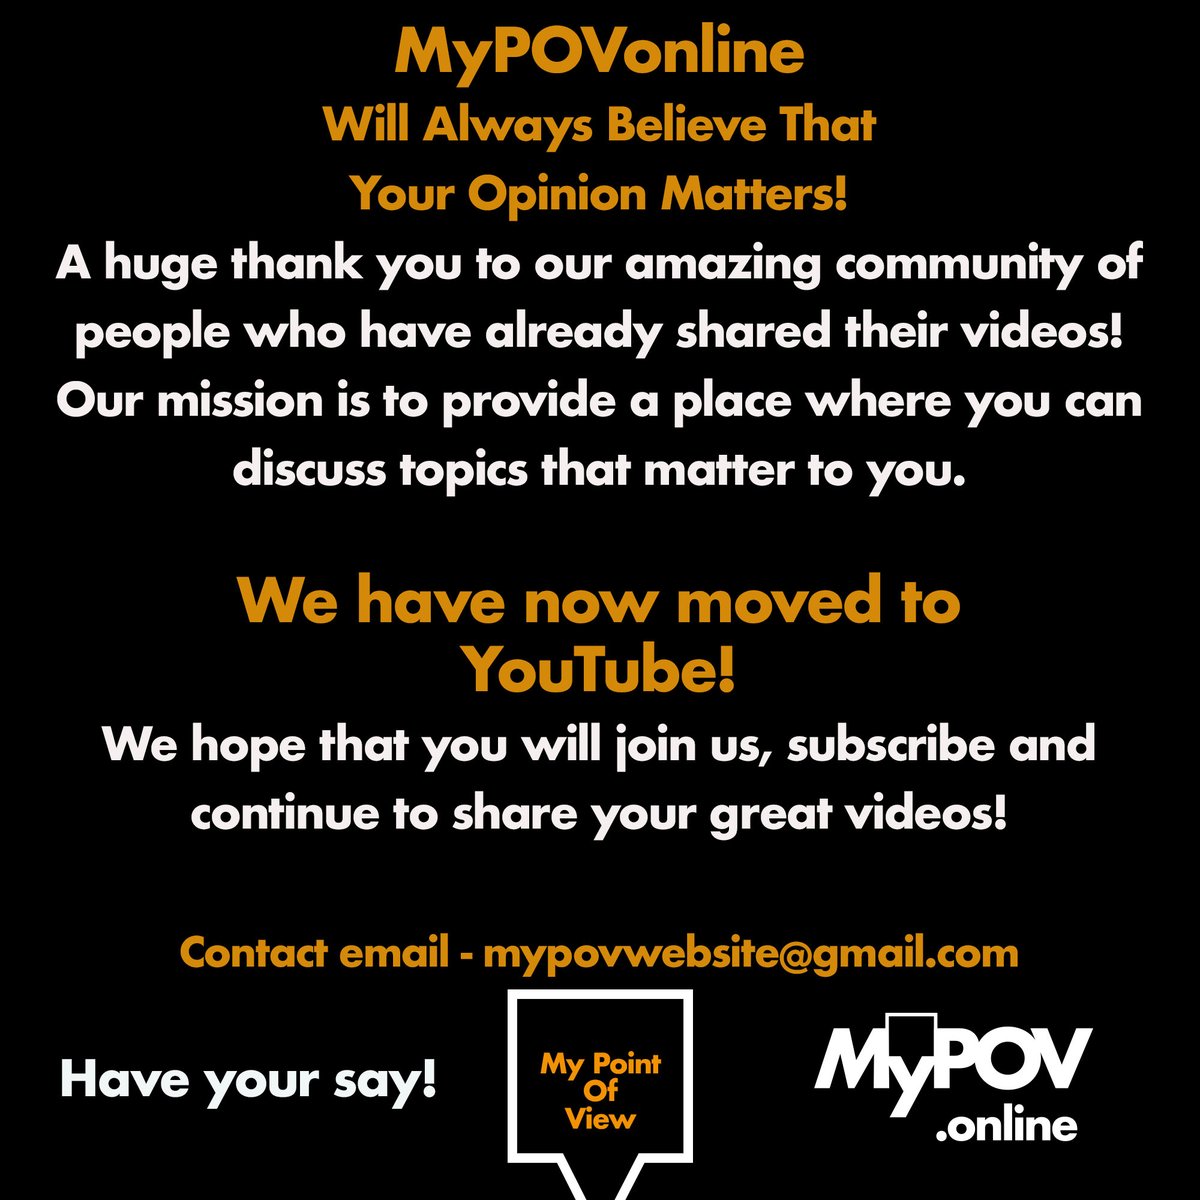 MyPOVonline has now moved to YouTube! We would be delighted to continue to share your amazing Points of View, Stories, Research and Charity Work. Please do email us if you would like to send us a video or book a recorded zoom. We hope you will all subscribe to our new channel!